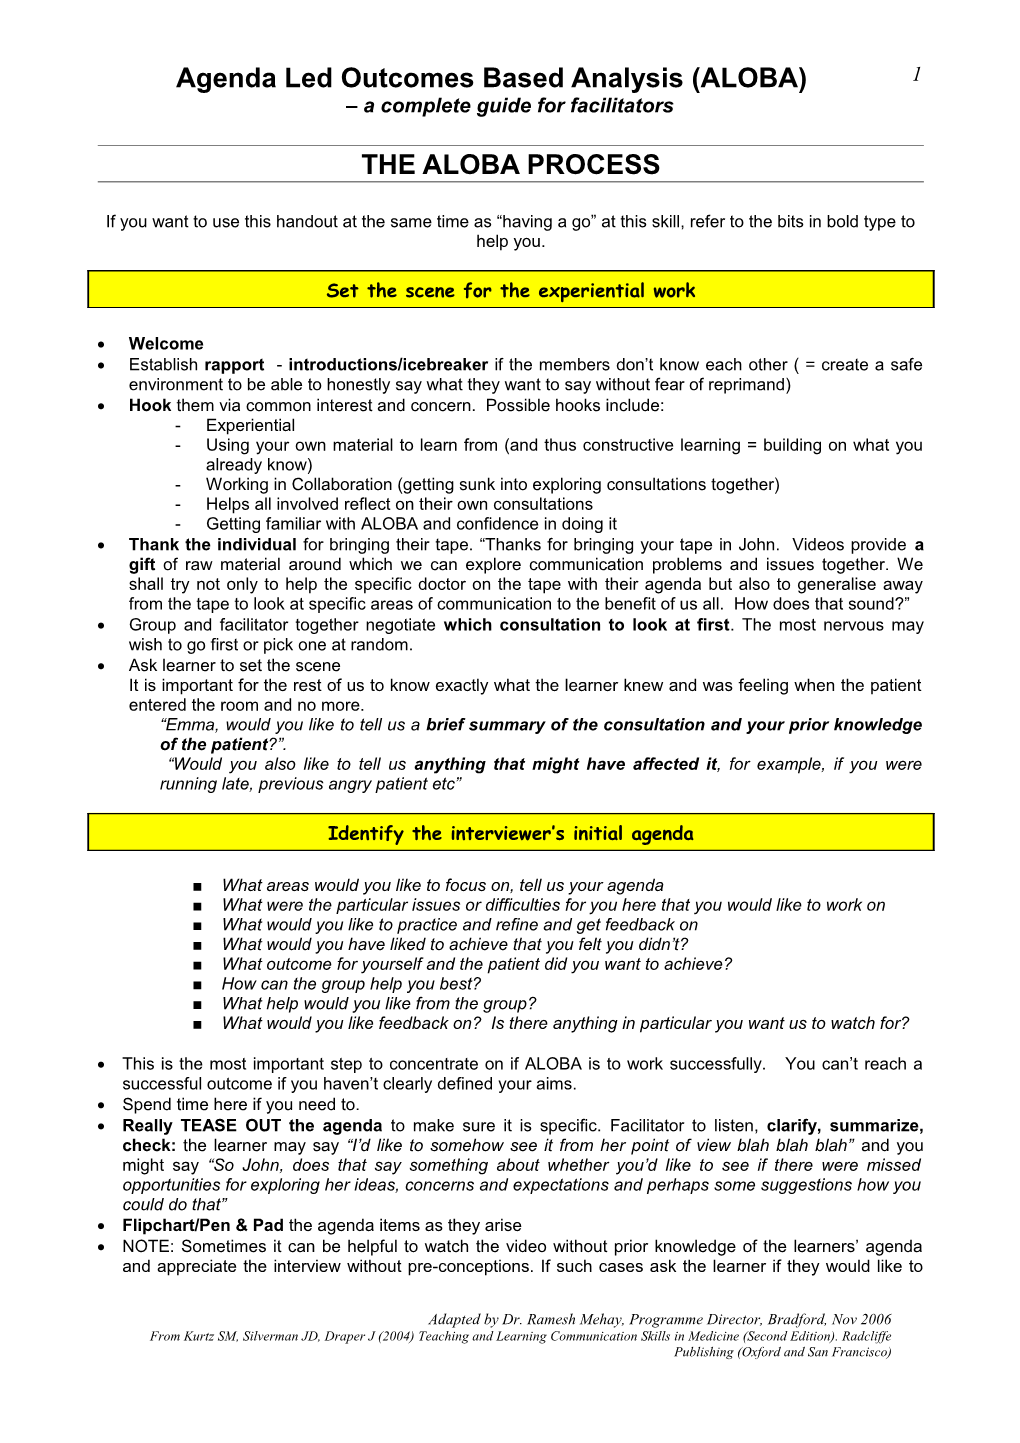 If You Want to Use This Handout at the Same Time As Having a Go at This Skill, Refer To